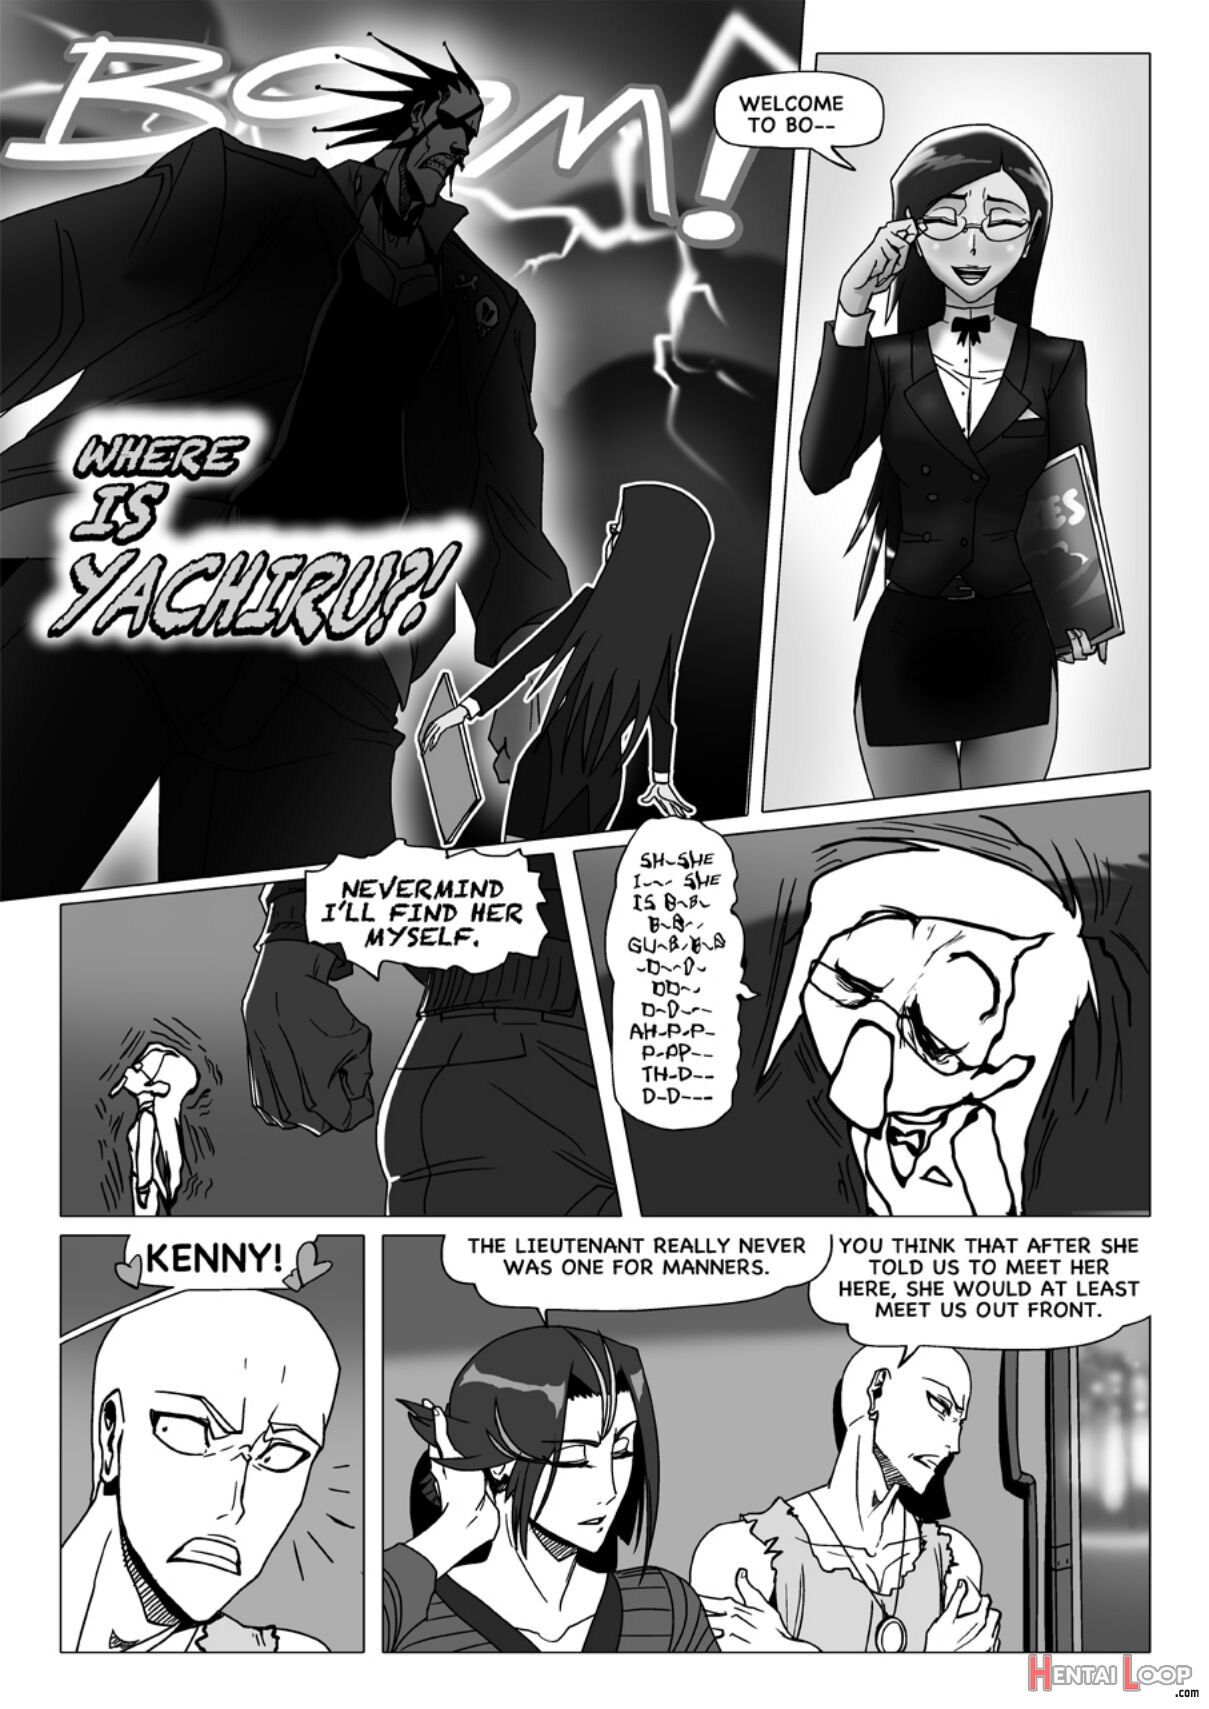 Happy To Serve You - Xxx Version page 58